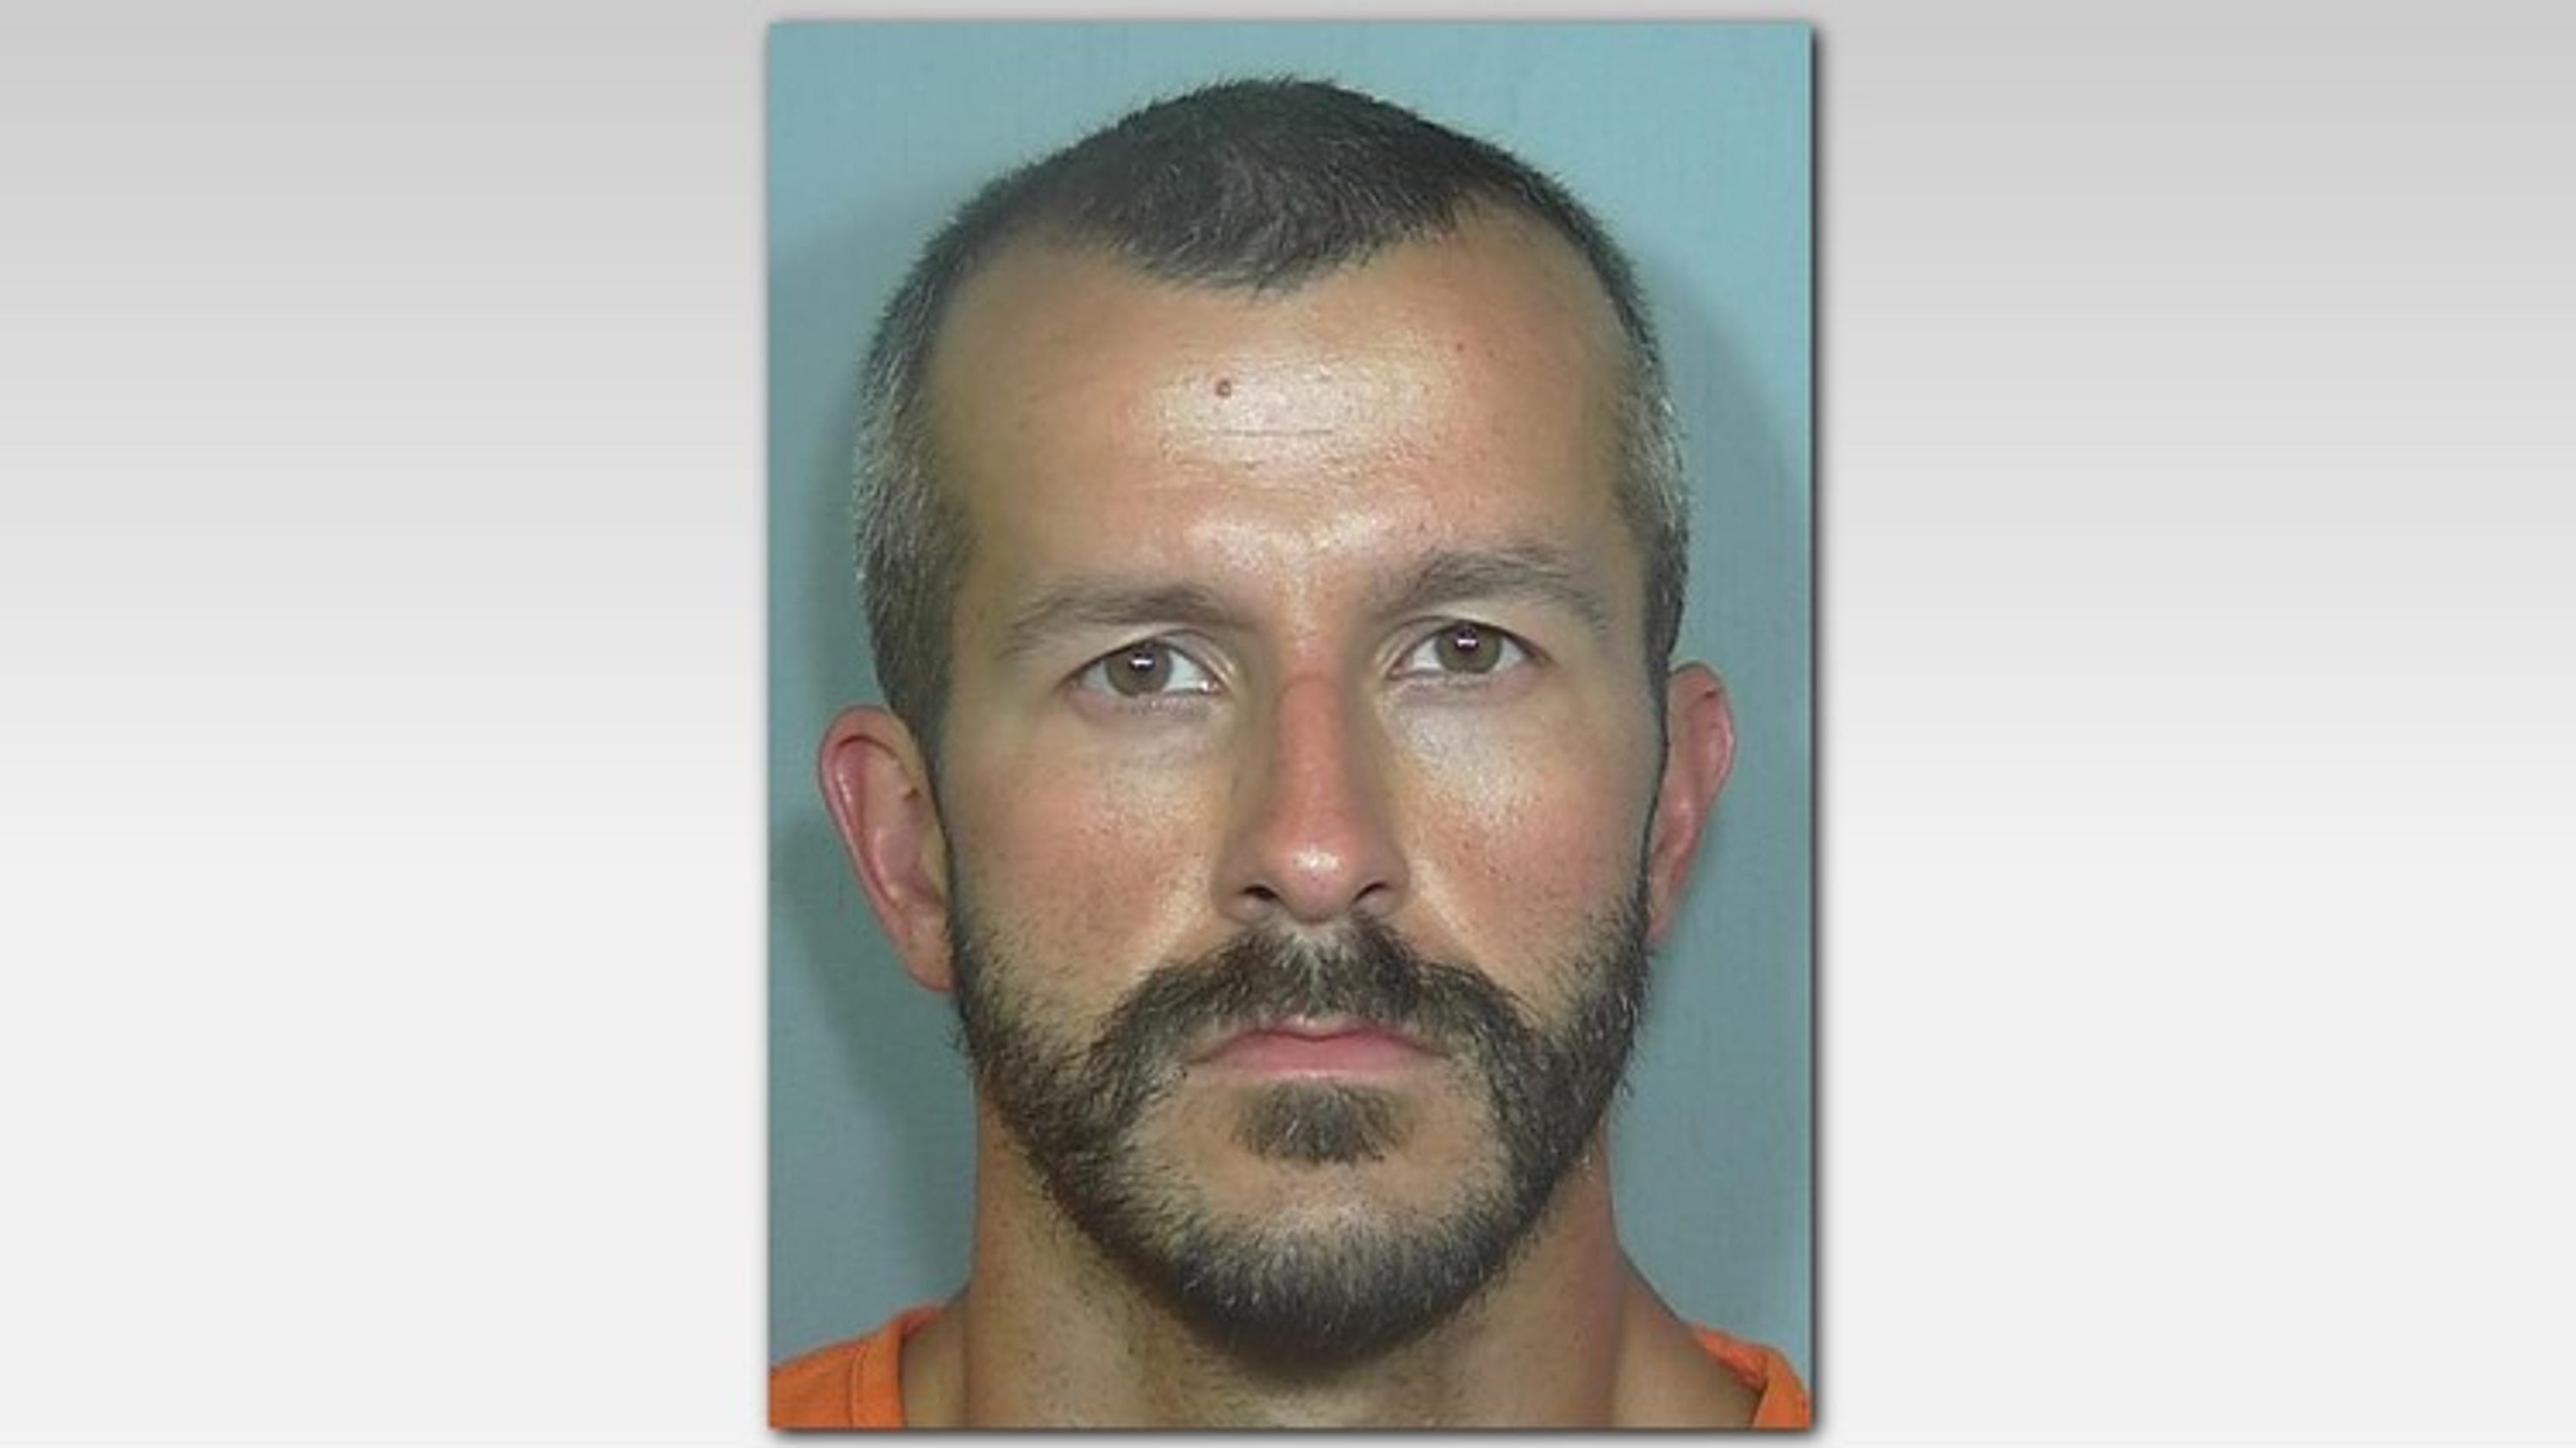 Colorado man Chris Watts suspected of killing pregnant wife, daughters2989 x 1680